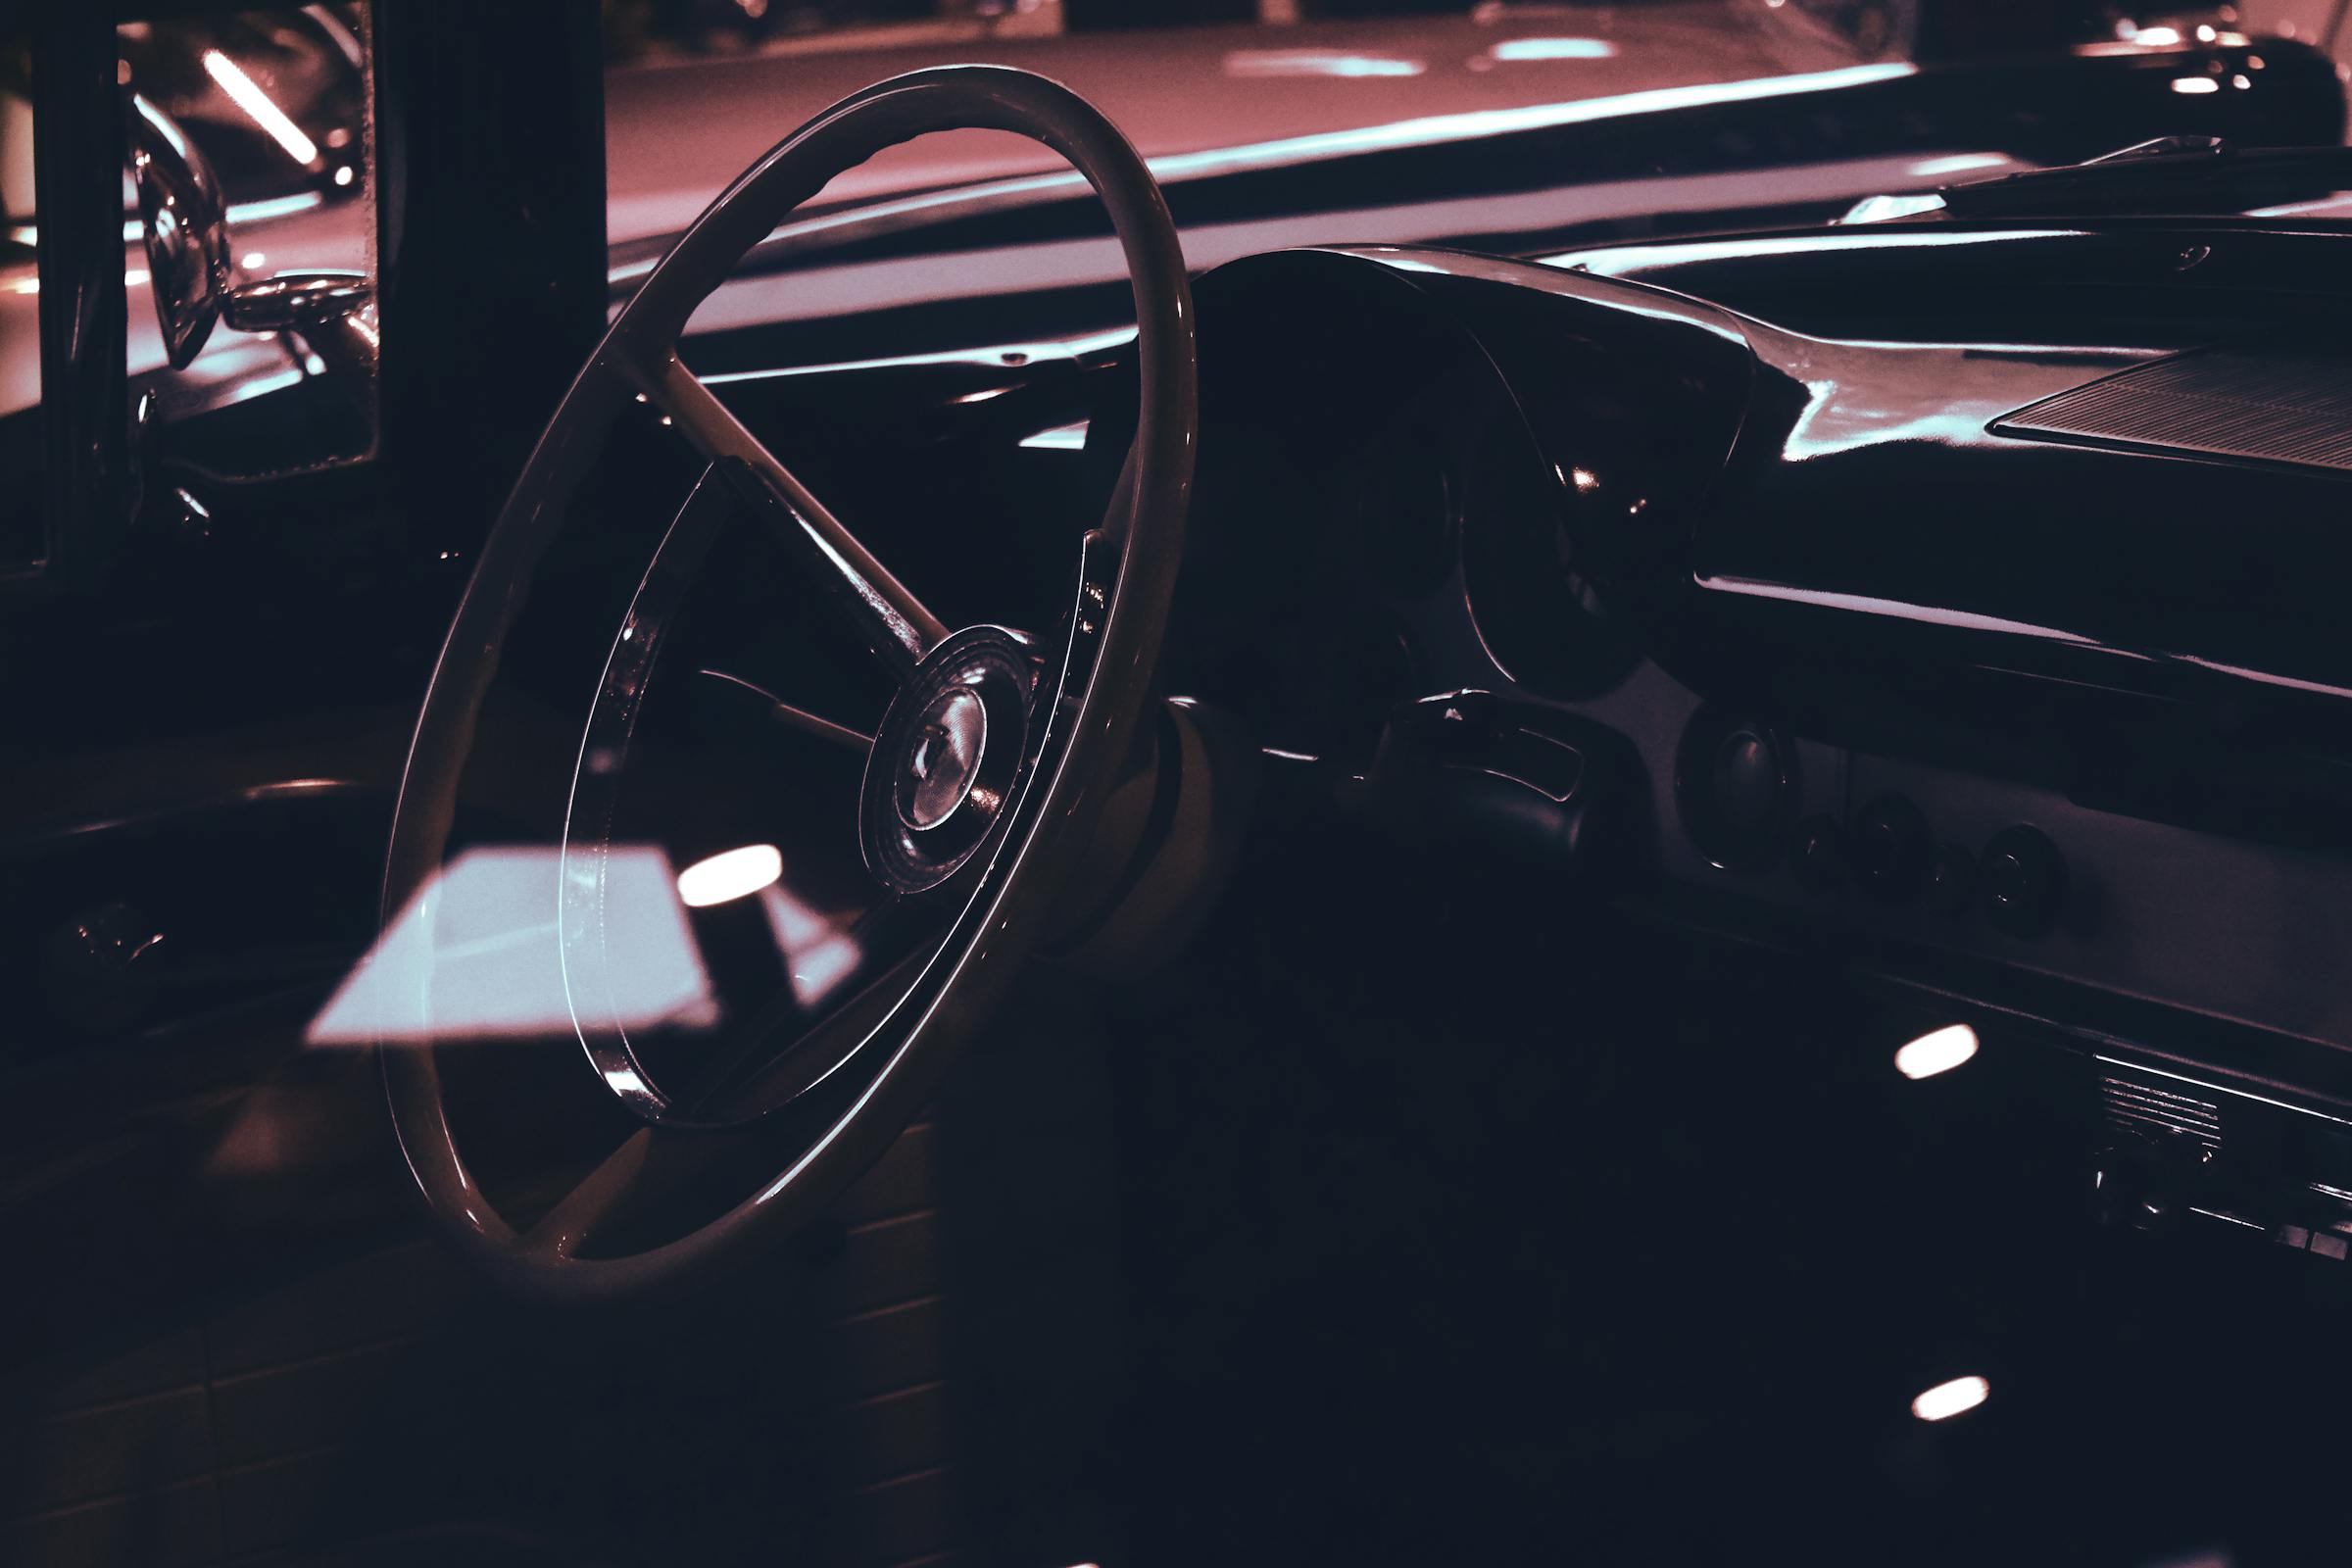 The dashboard of a vintage car | Source: Pexels